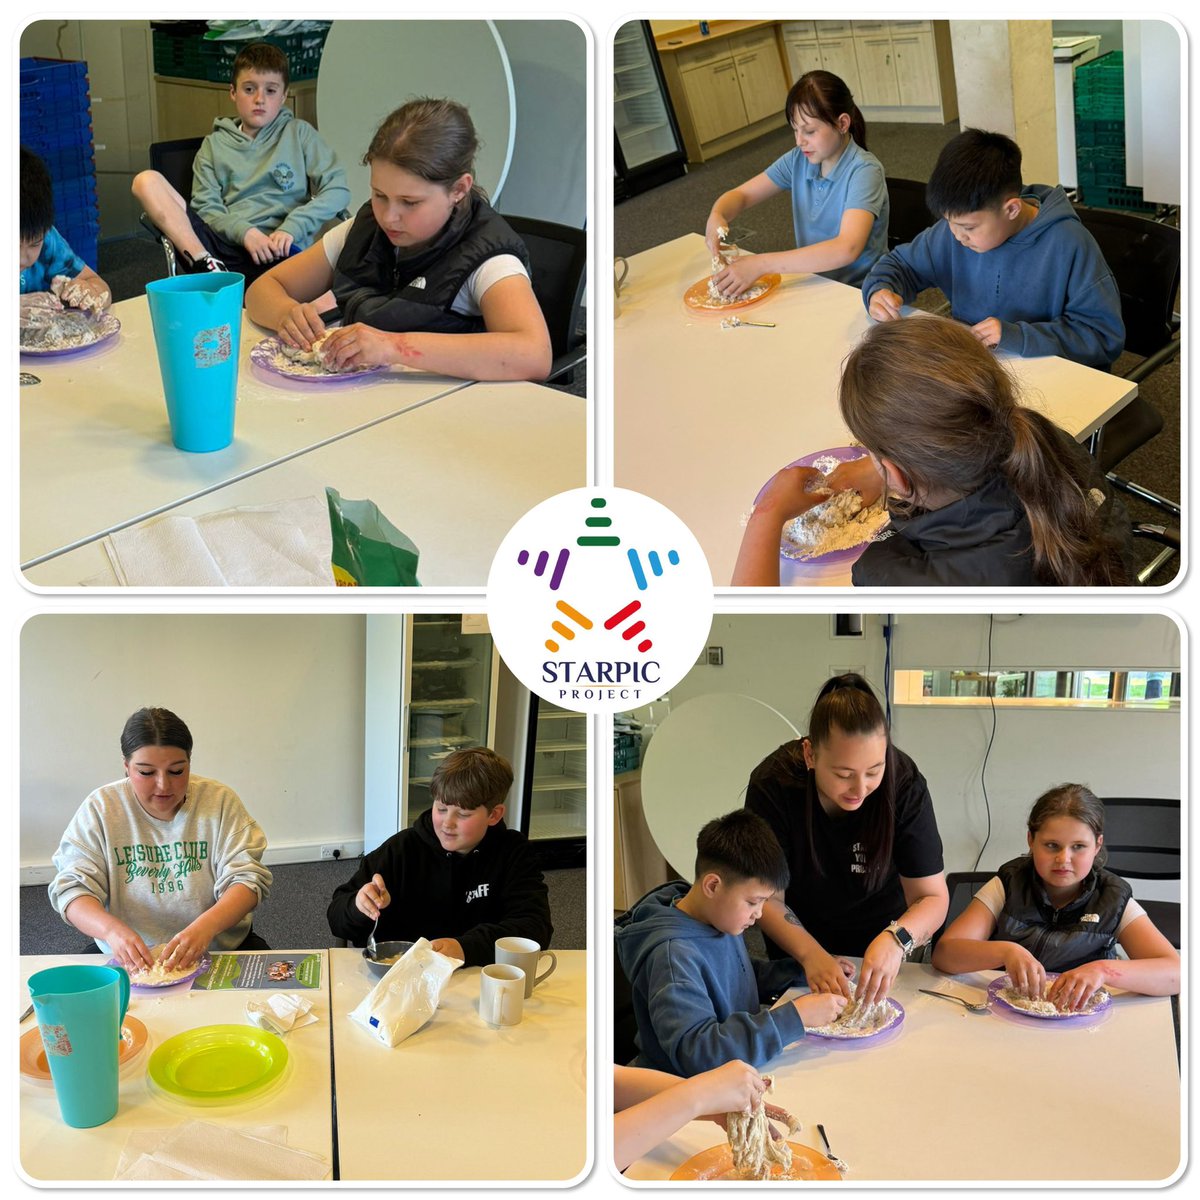 The Wednesday group being creative and having fun with friends.
________________________
#youthwork #starpicproject #community #confidence #safespace #learning #transferableskillsets